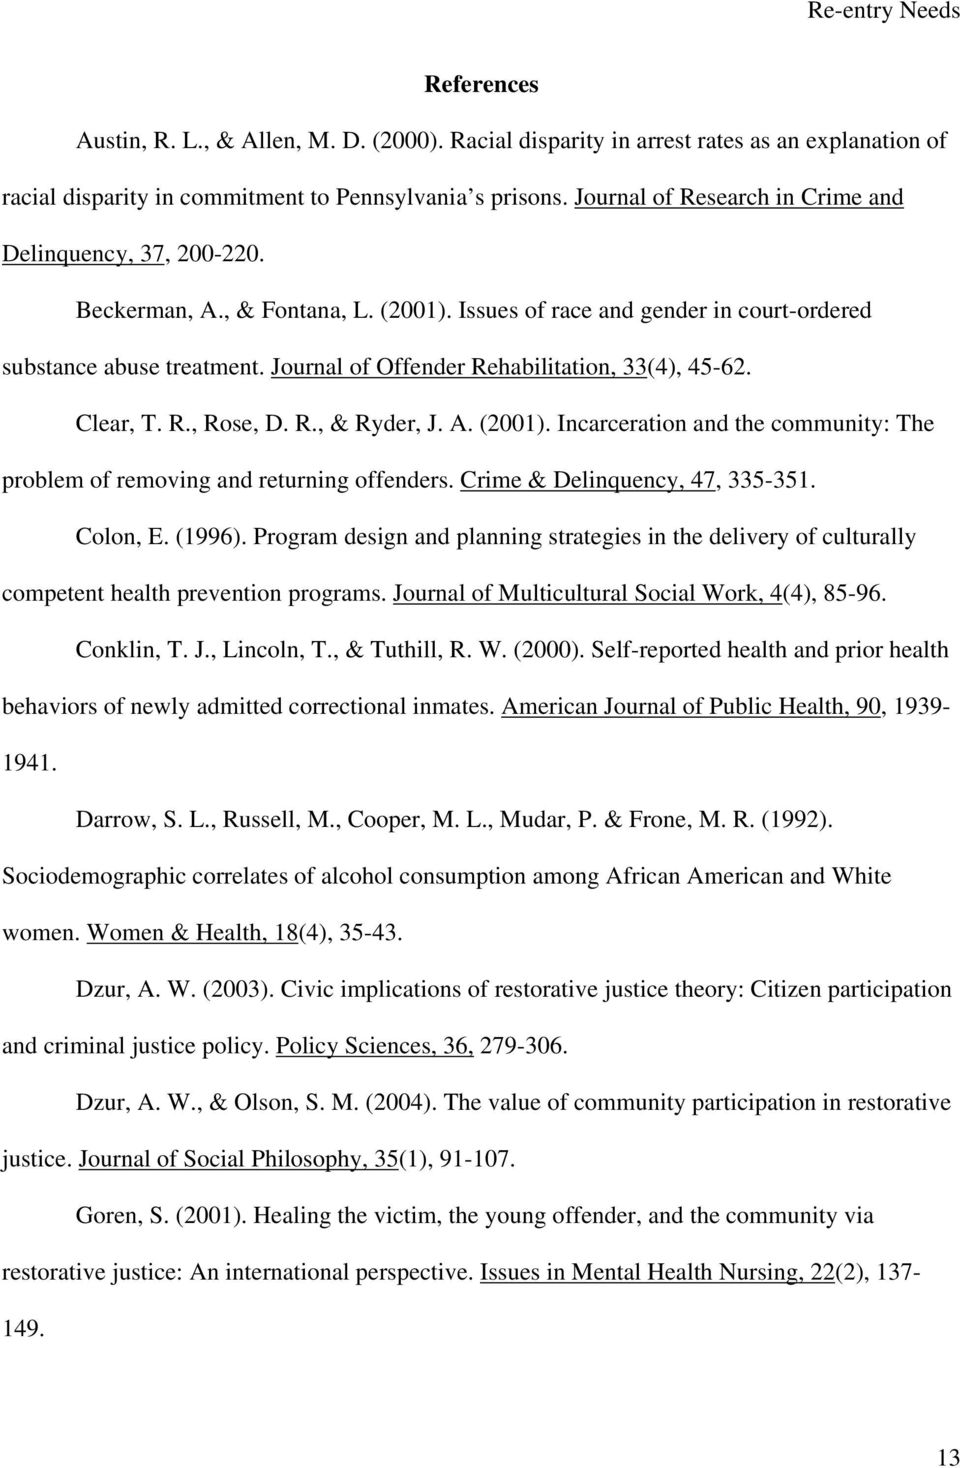 Journal of Offender Rehabilitation, 33(4), 45-62. Clear, T. R., Rose, D. R., & Ryder, J. A. (2001). Incarceration and the community: The problem of removing and returning offenders.